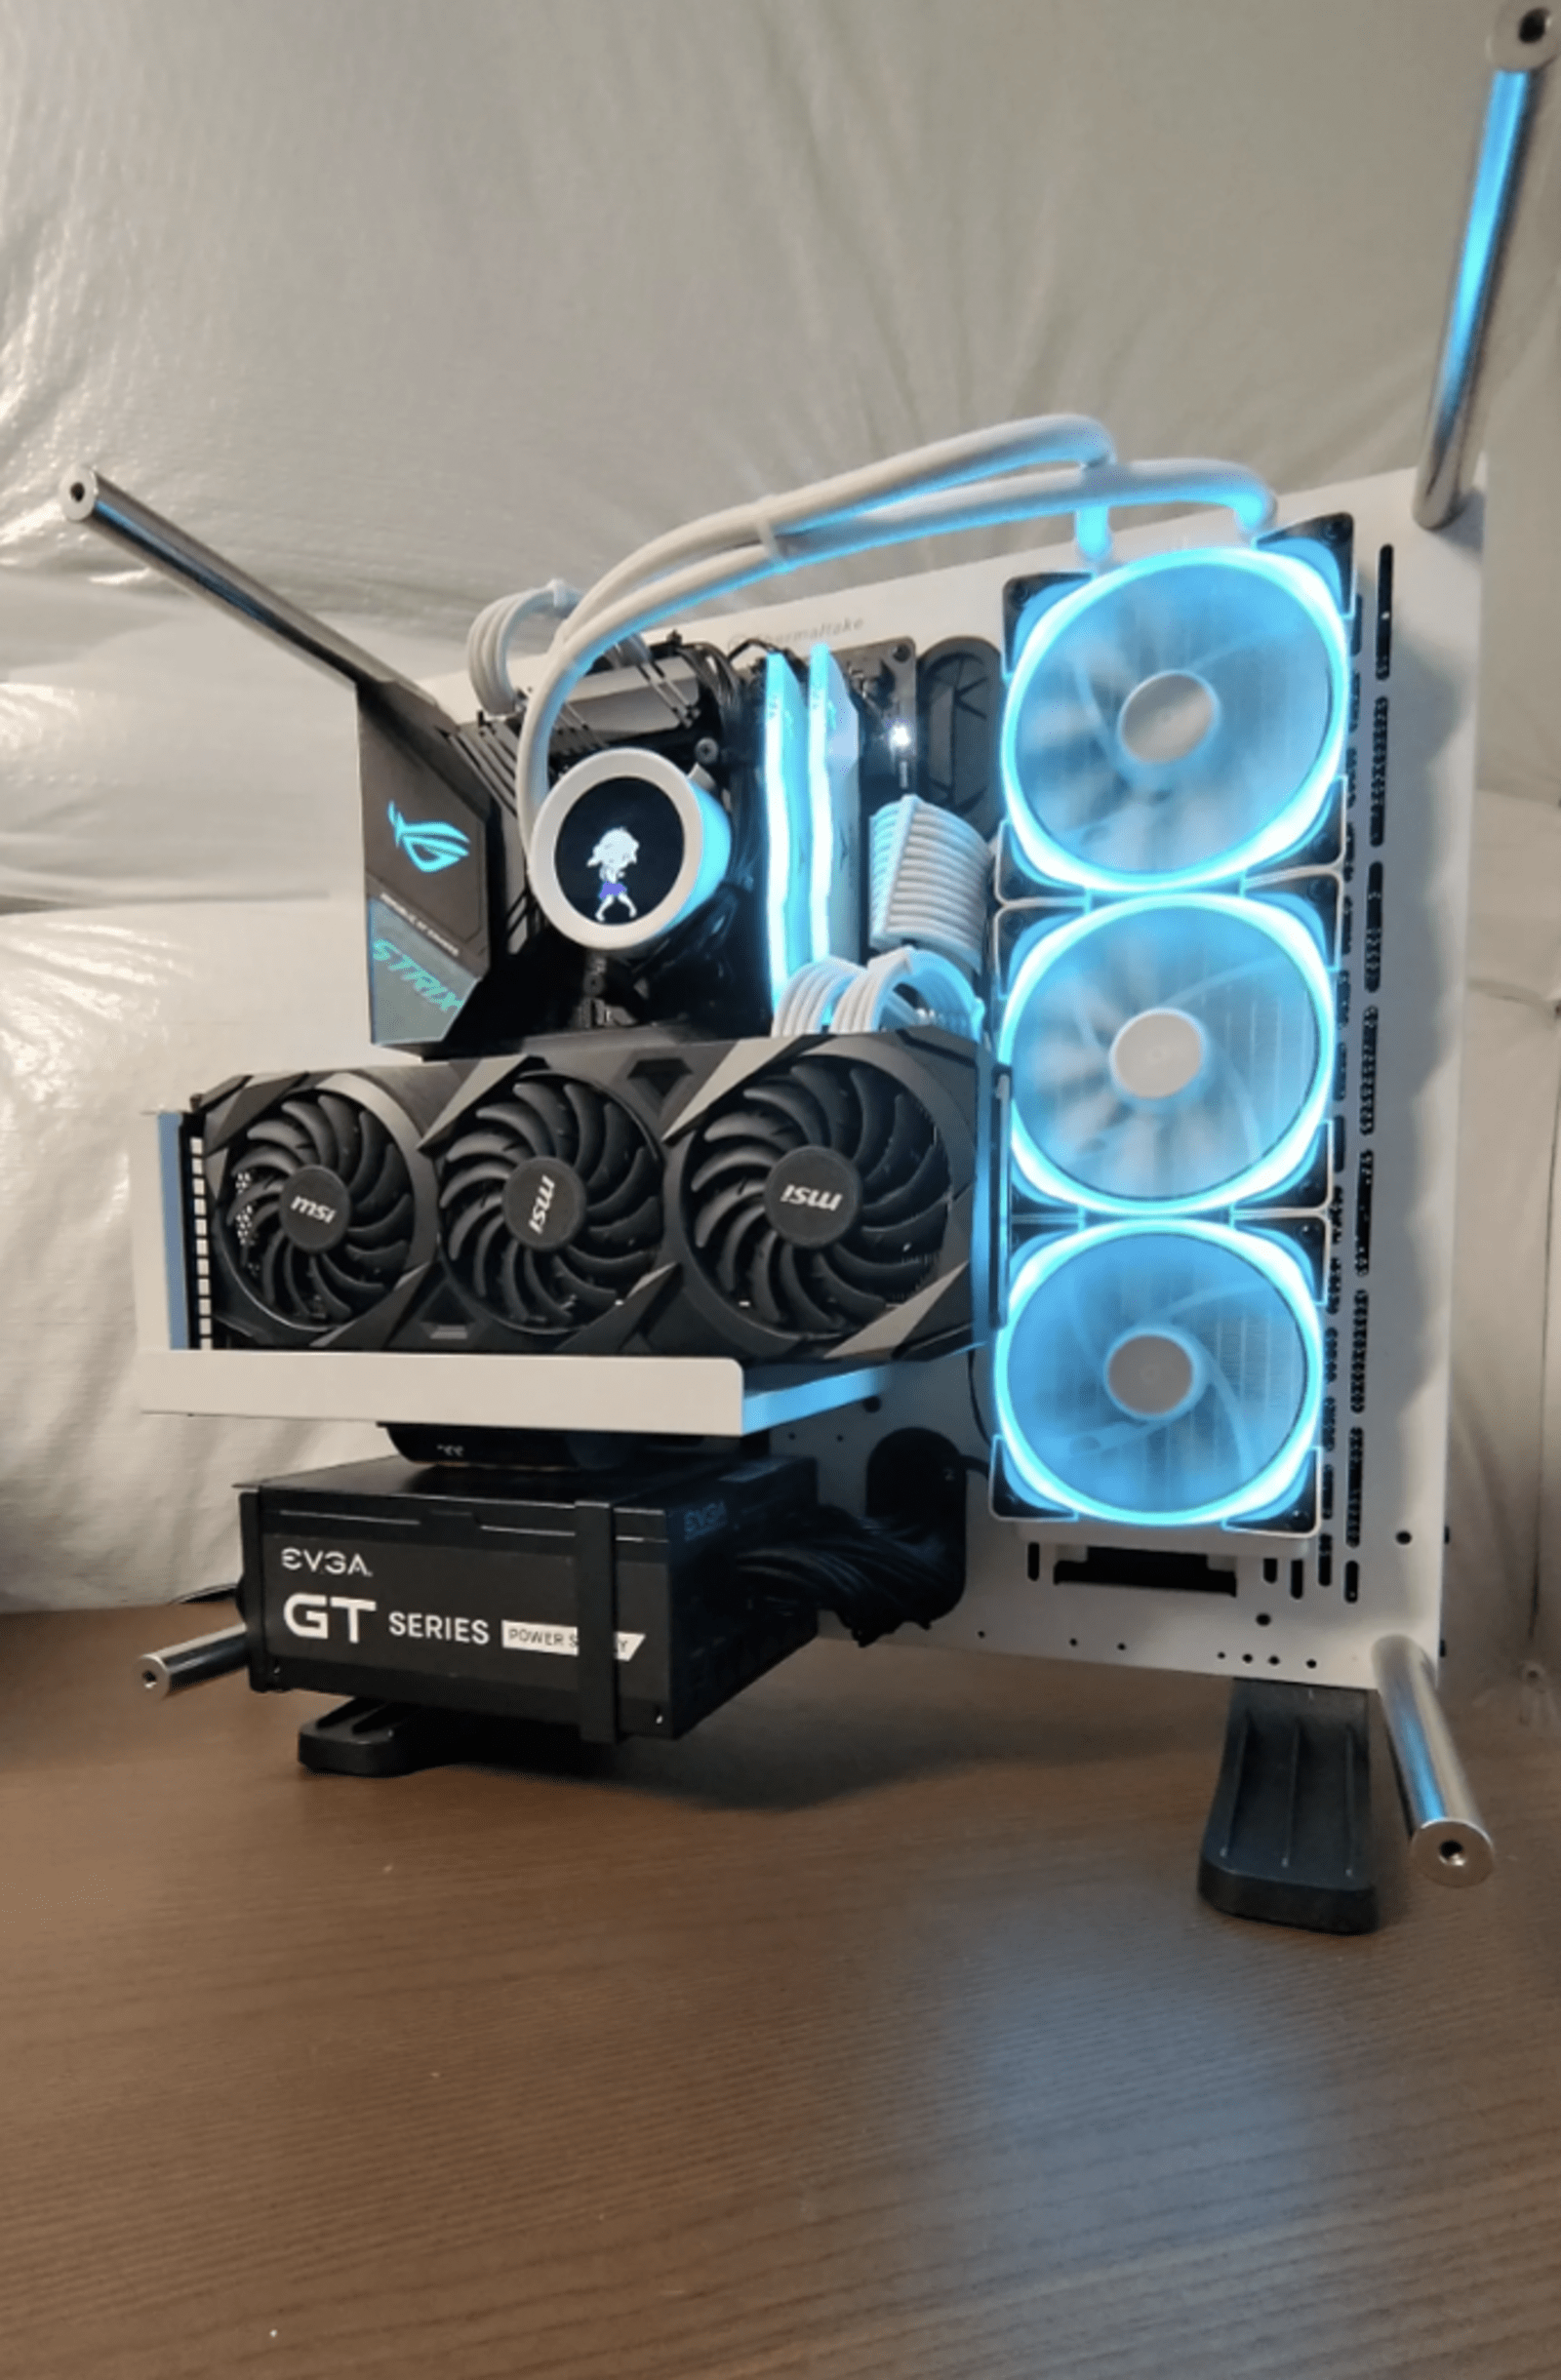 I’m a Little Biased Towards This Gaming PC…